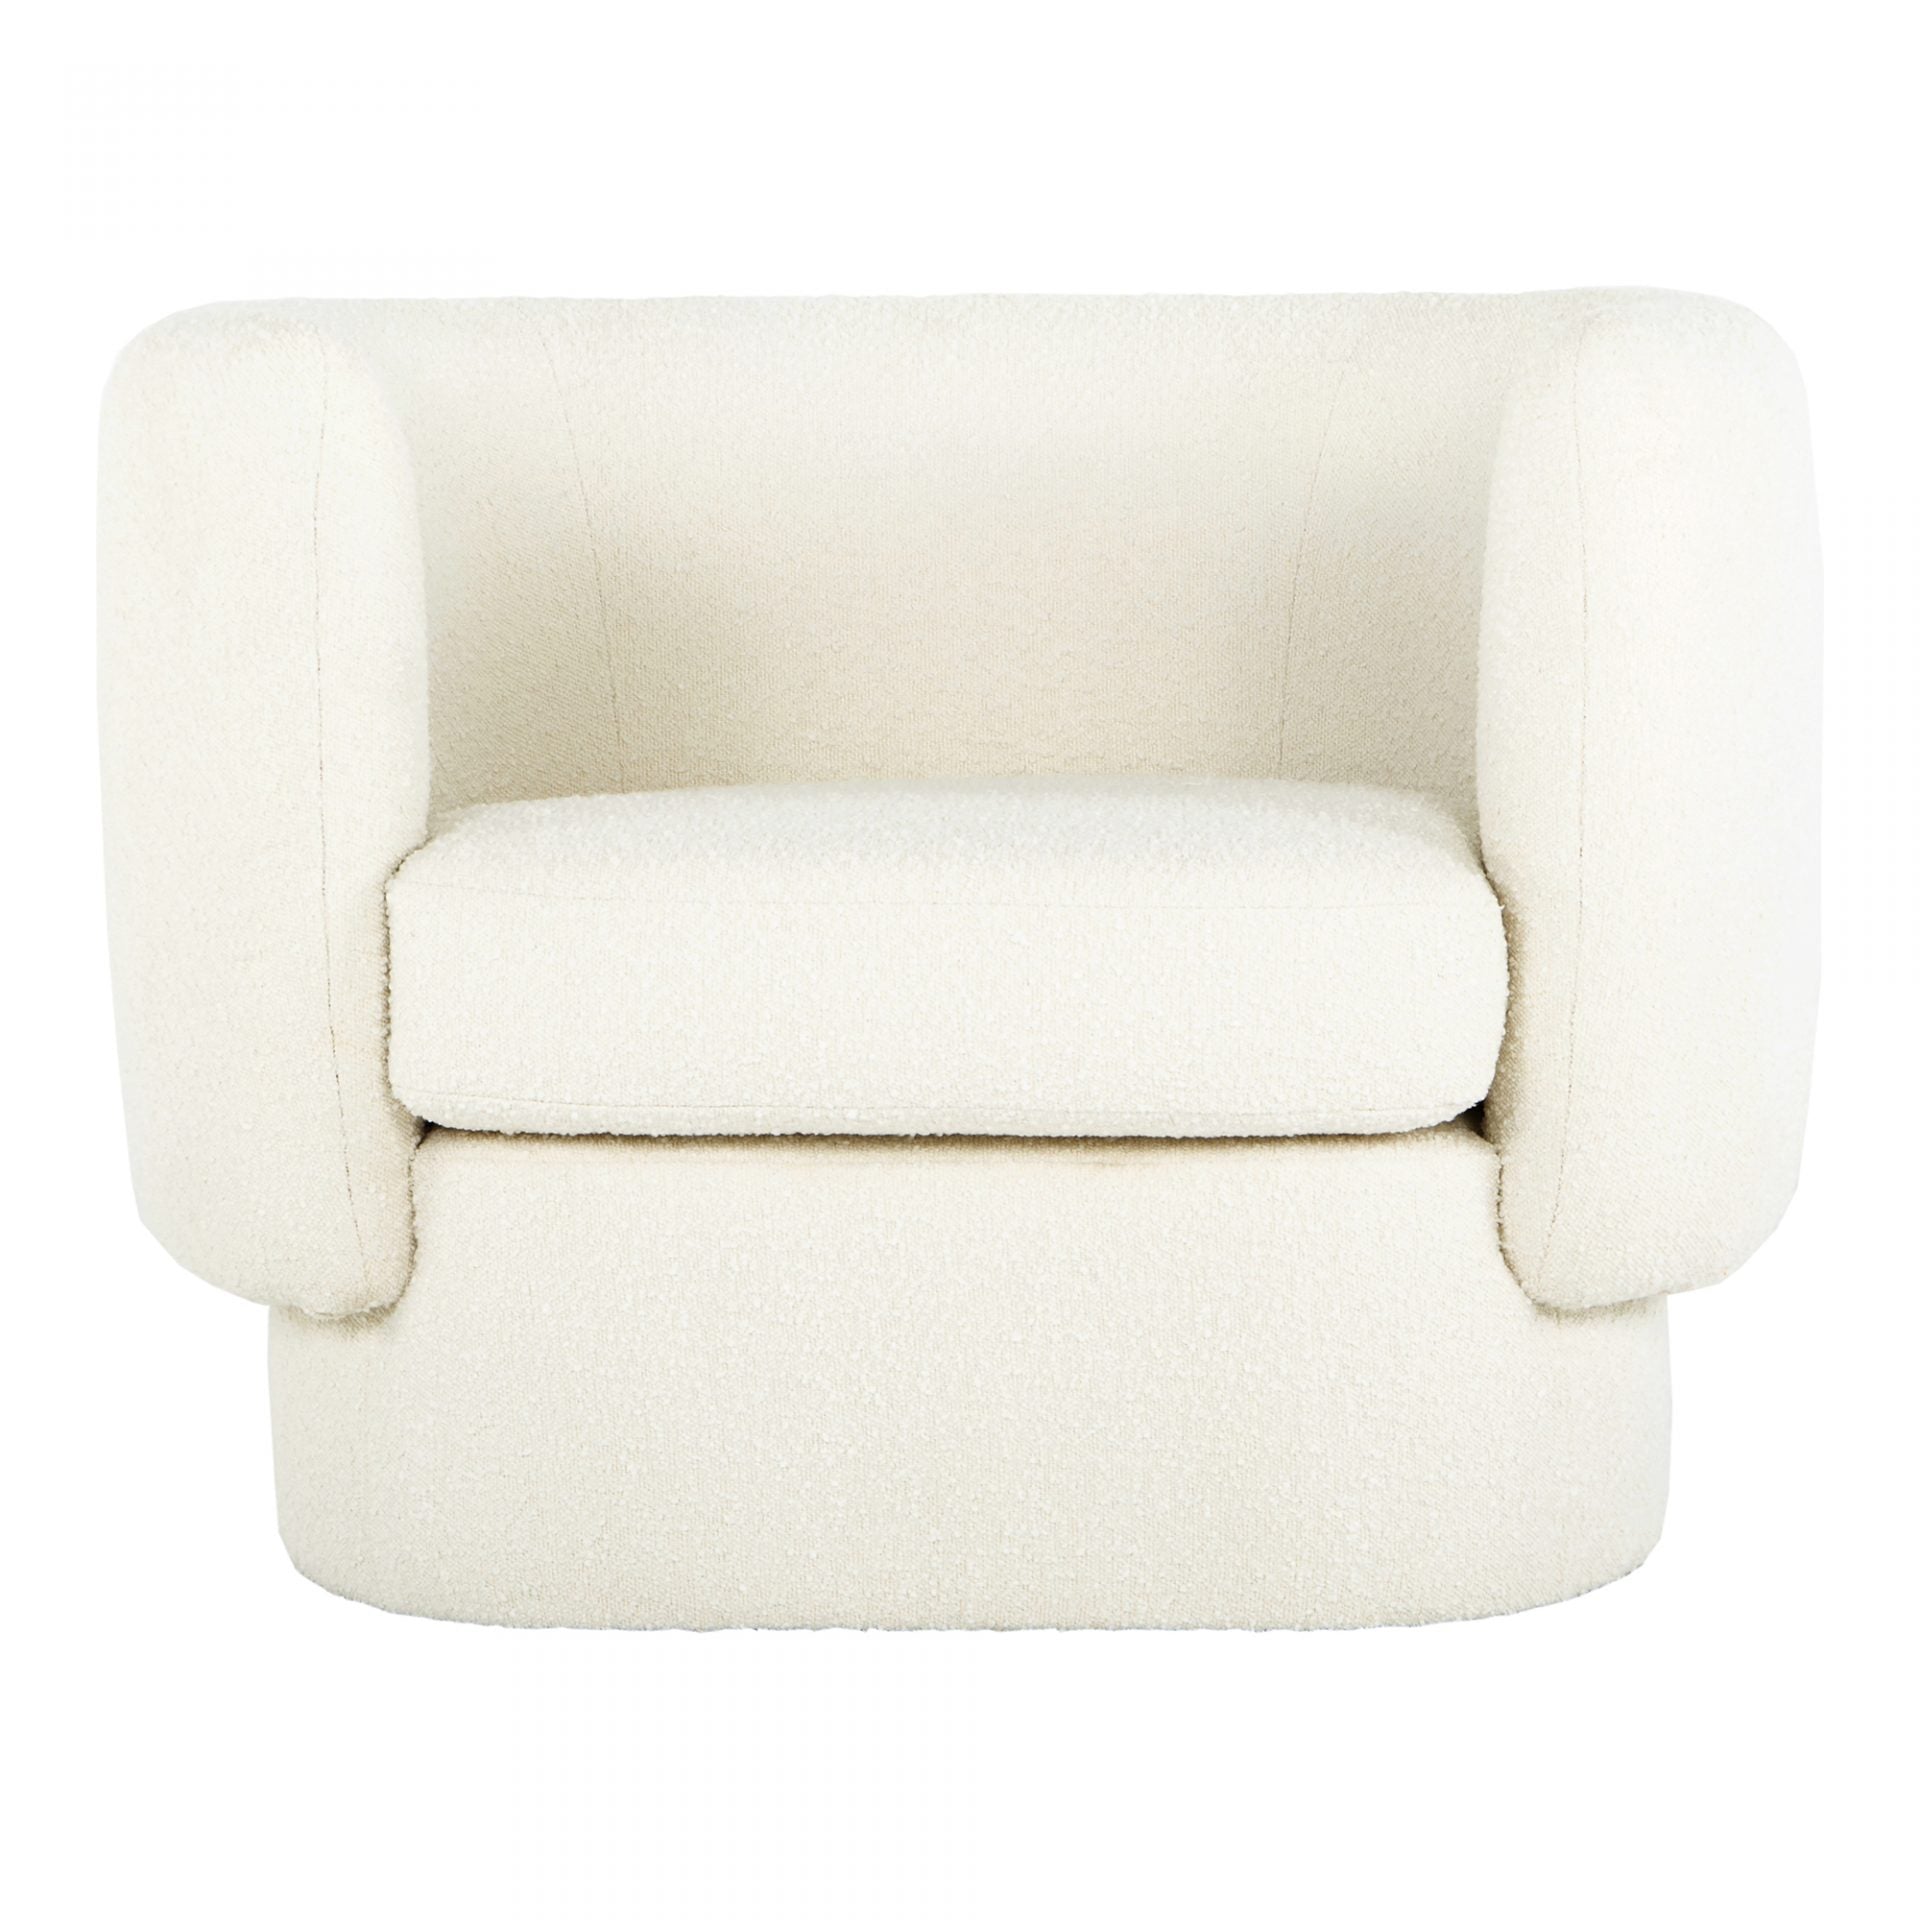 We love the textured look of this Koba Maya White Chair. A gorgeous, comfy chair to add to your living room, den, or office area.   Overall Size: 39.5"W x 32.5"D x 29"H Seat Height: 18" Back Height: 12"